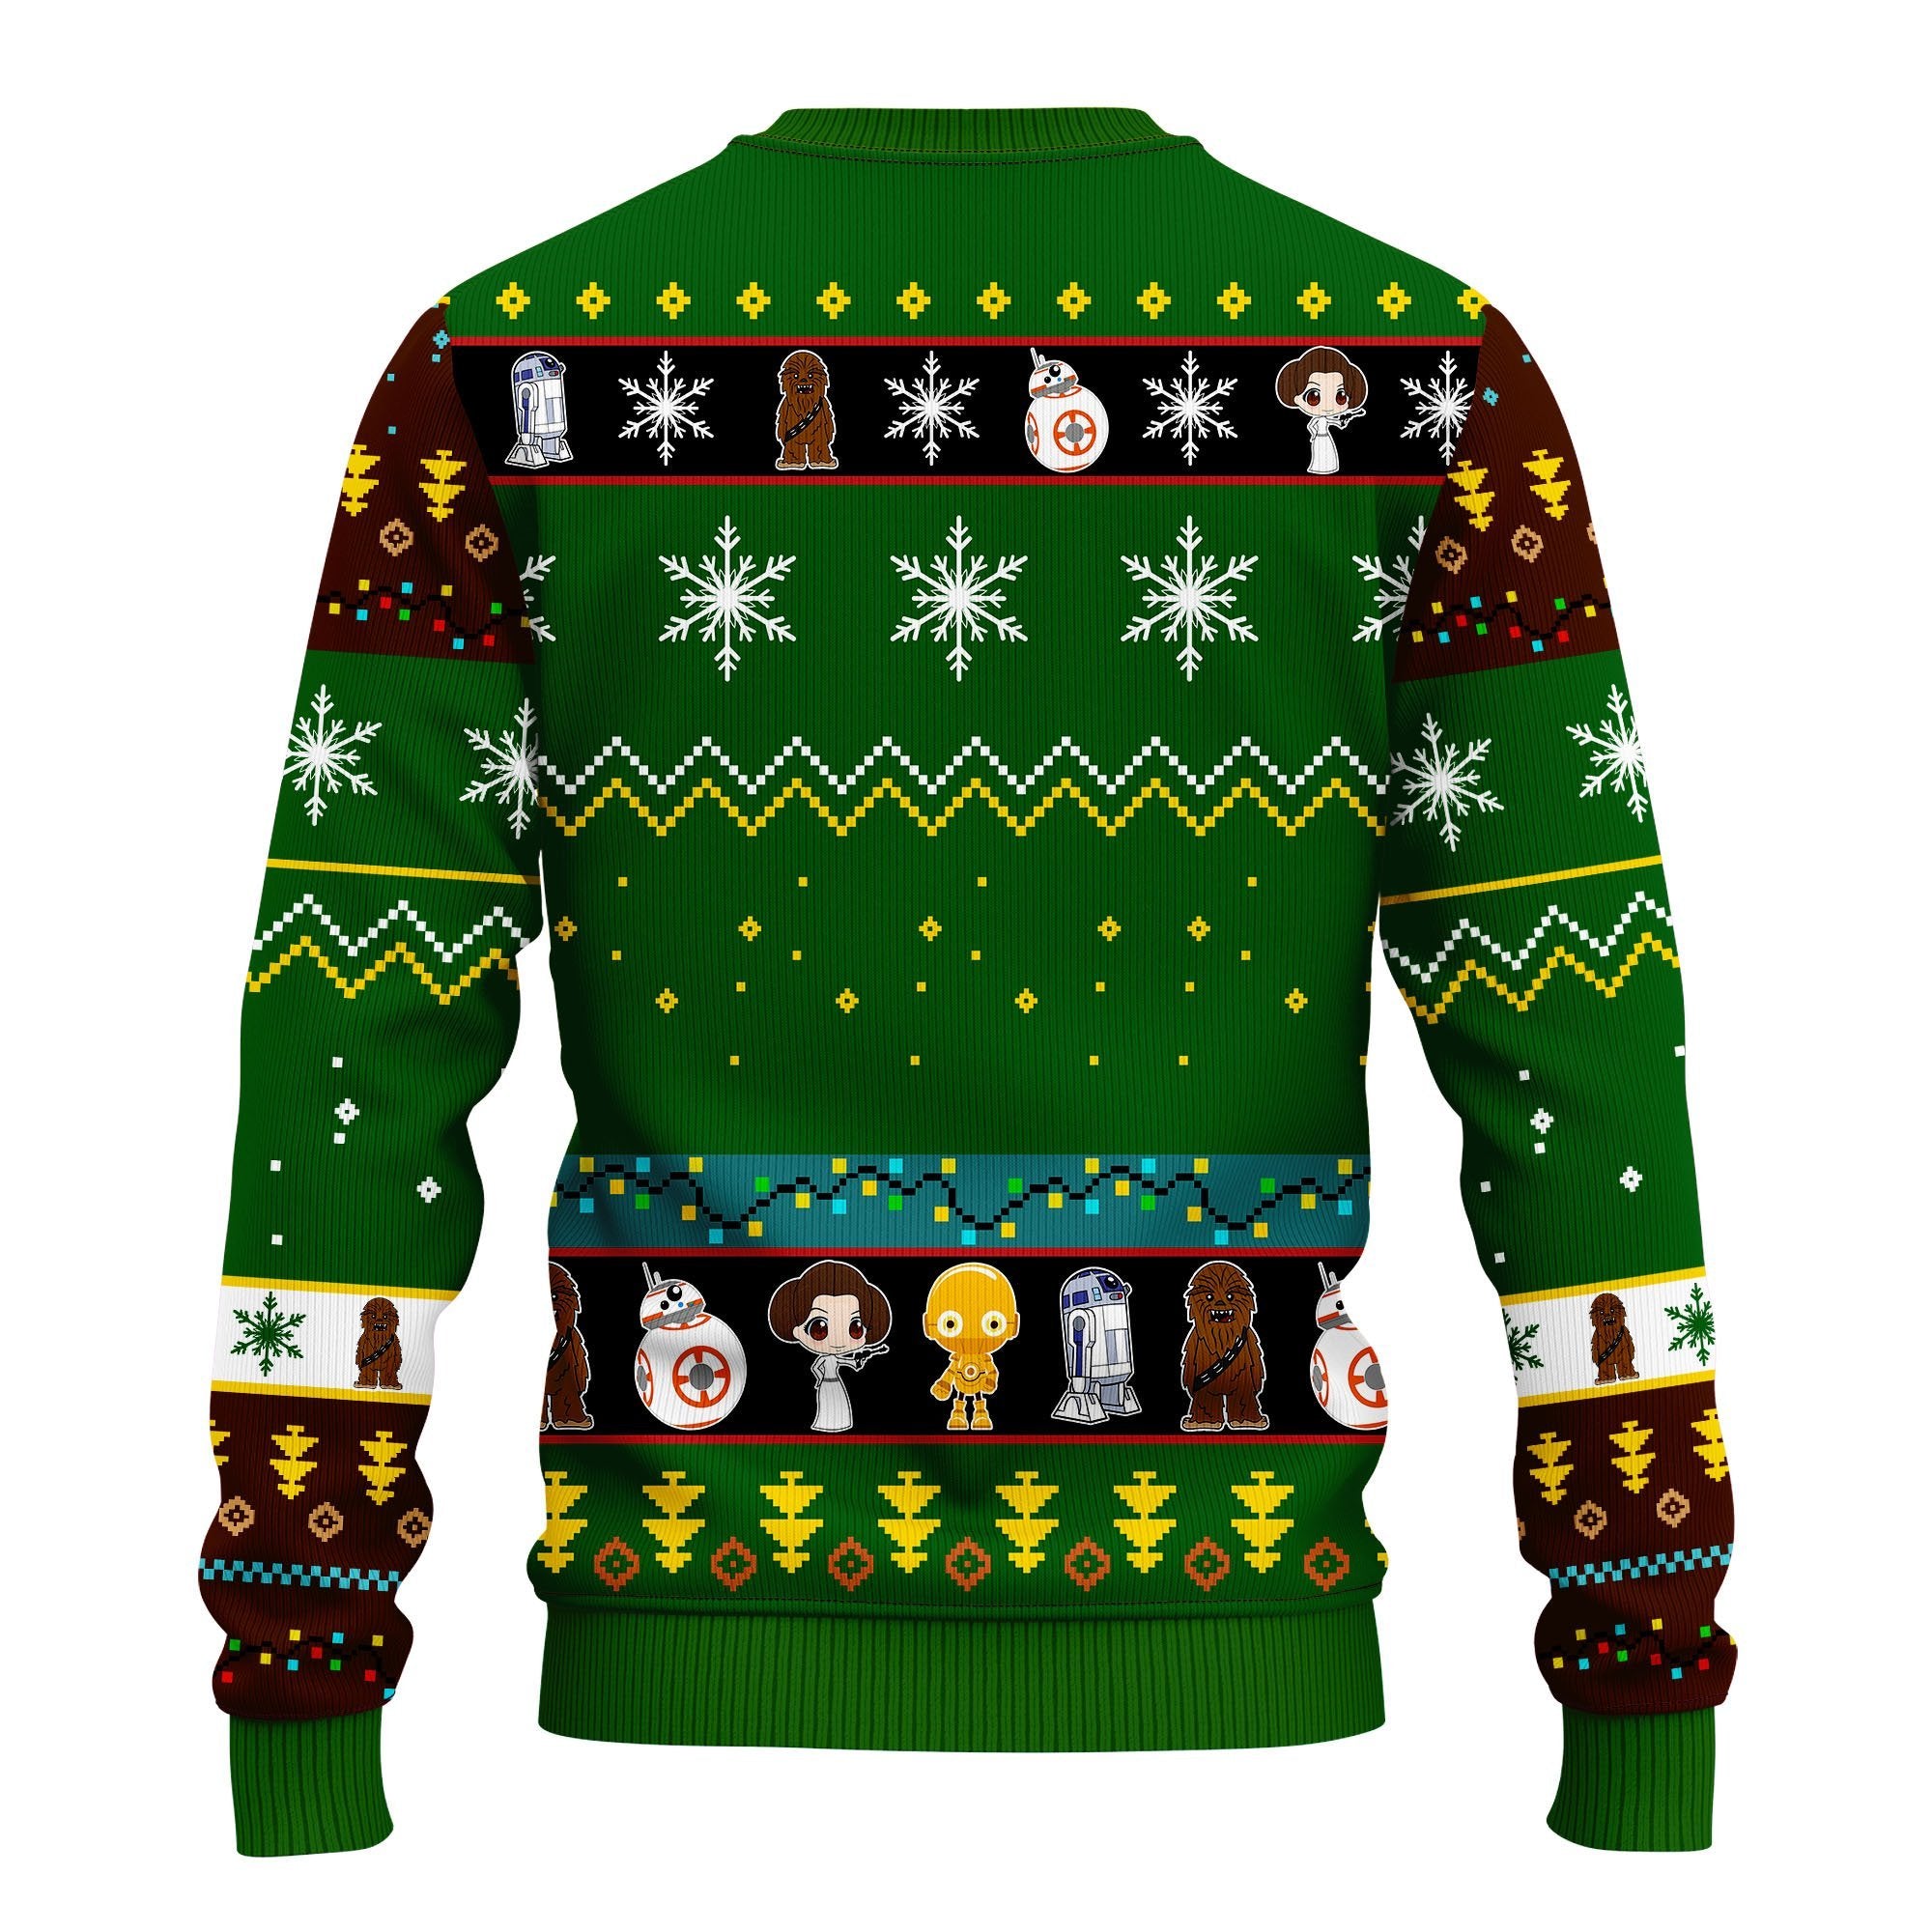 Star Wars B88 Ugly Christmas Sweater Green 1 Amazing Gift Idea Thanksgiving Gift